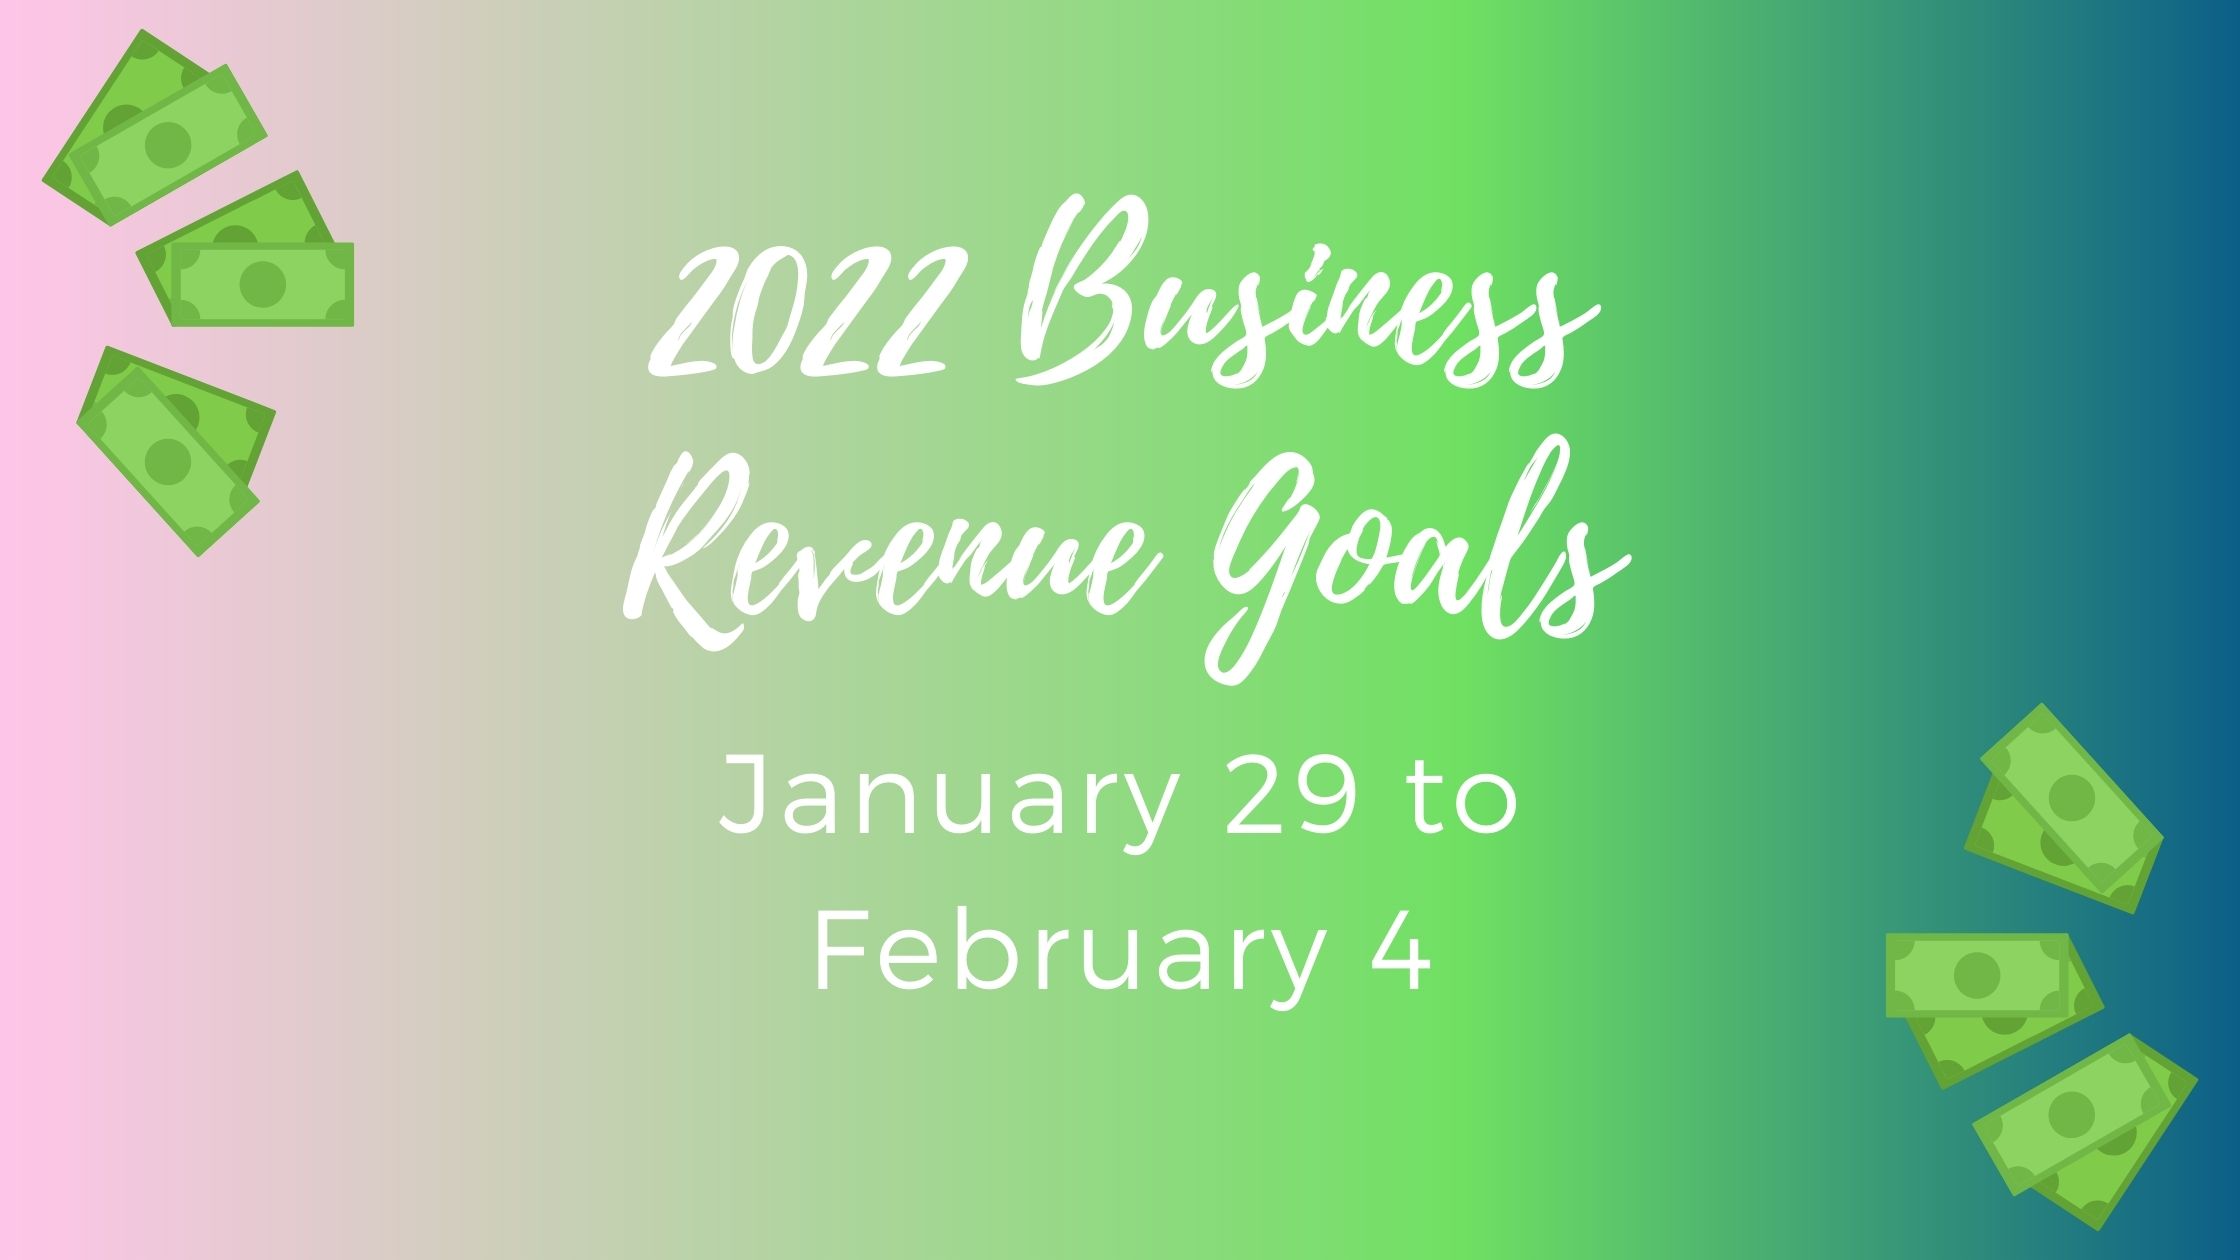 Business Goal Tracking for Week 5 of 2022